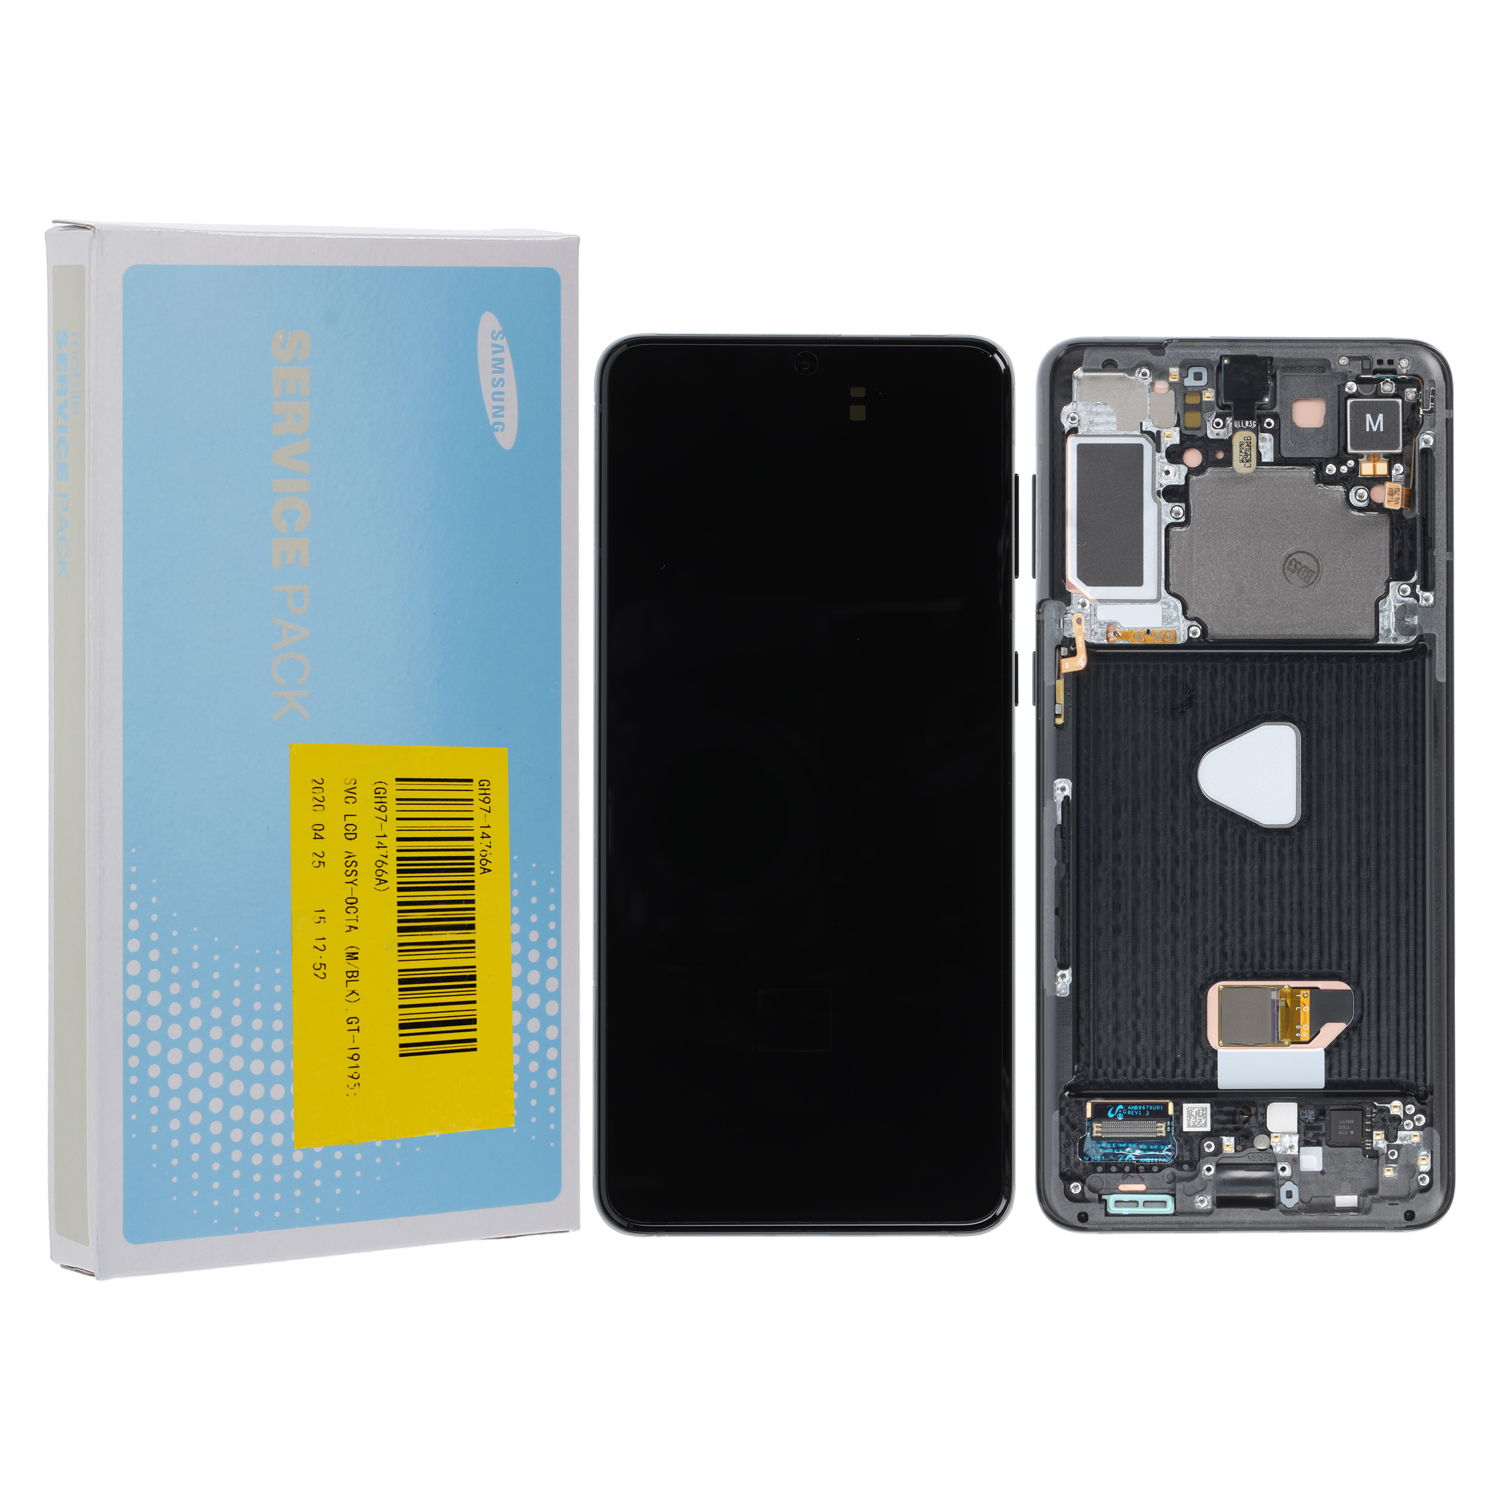 Samsung Galaxy S21+ G996B/DS LCD Display (with CAM /No Battery) Phantom Black Service Pack